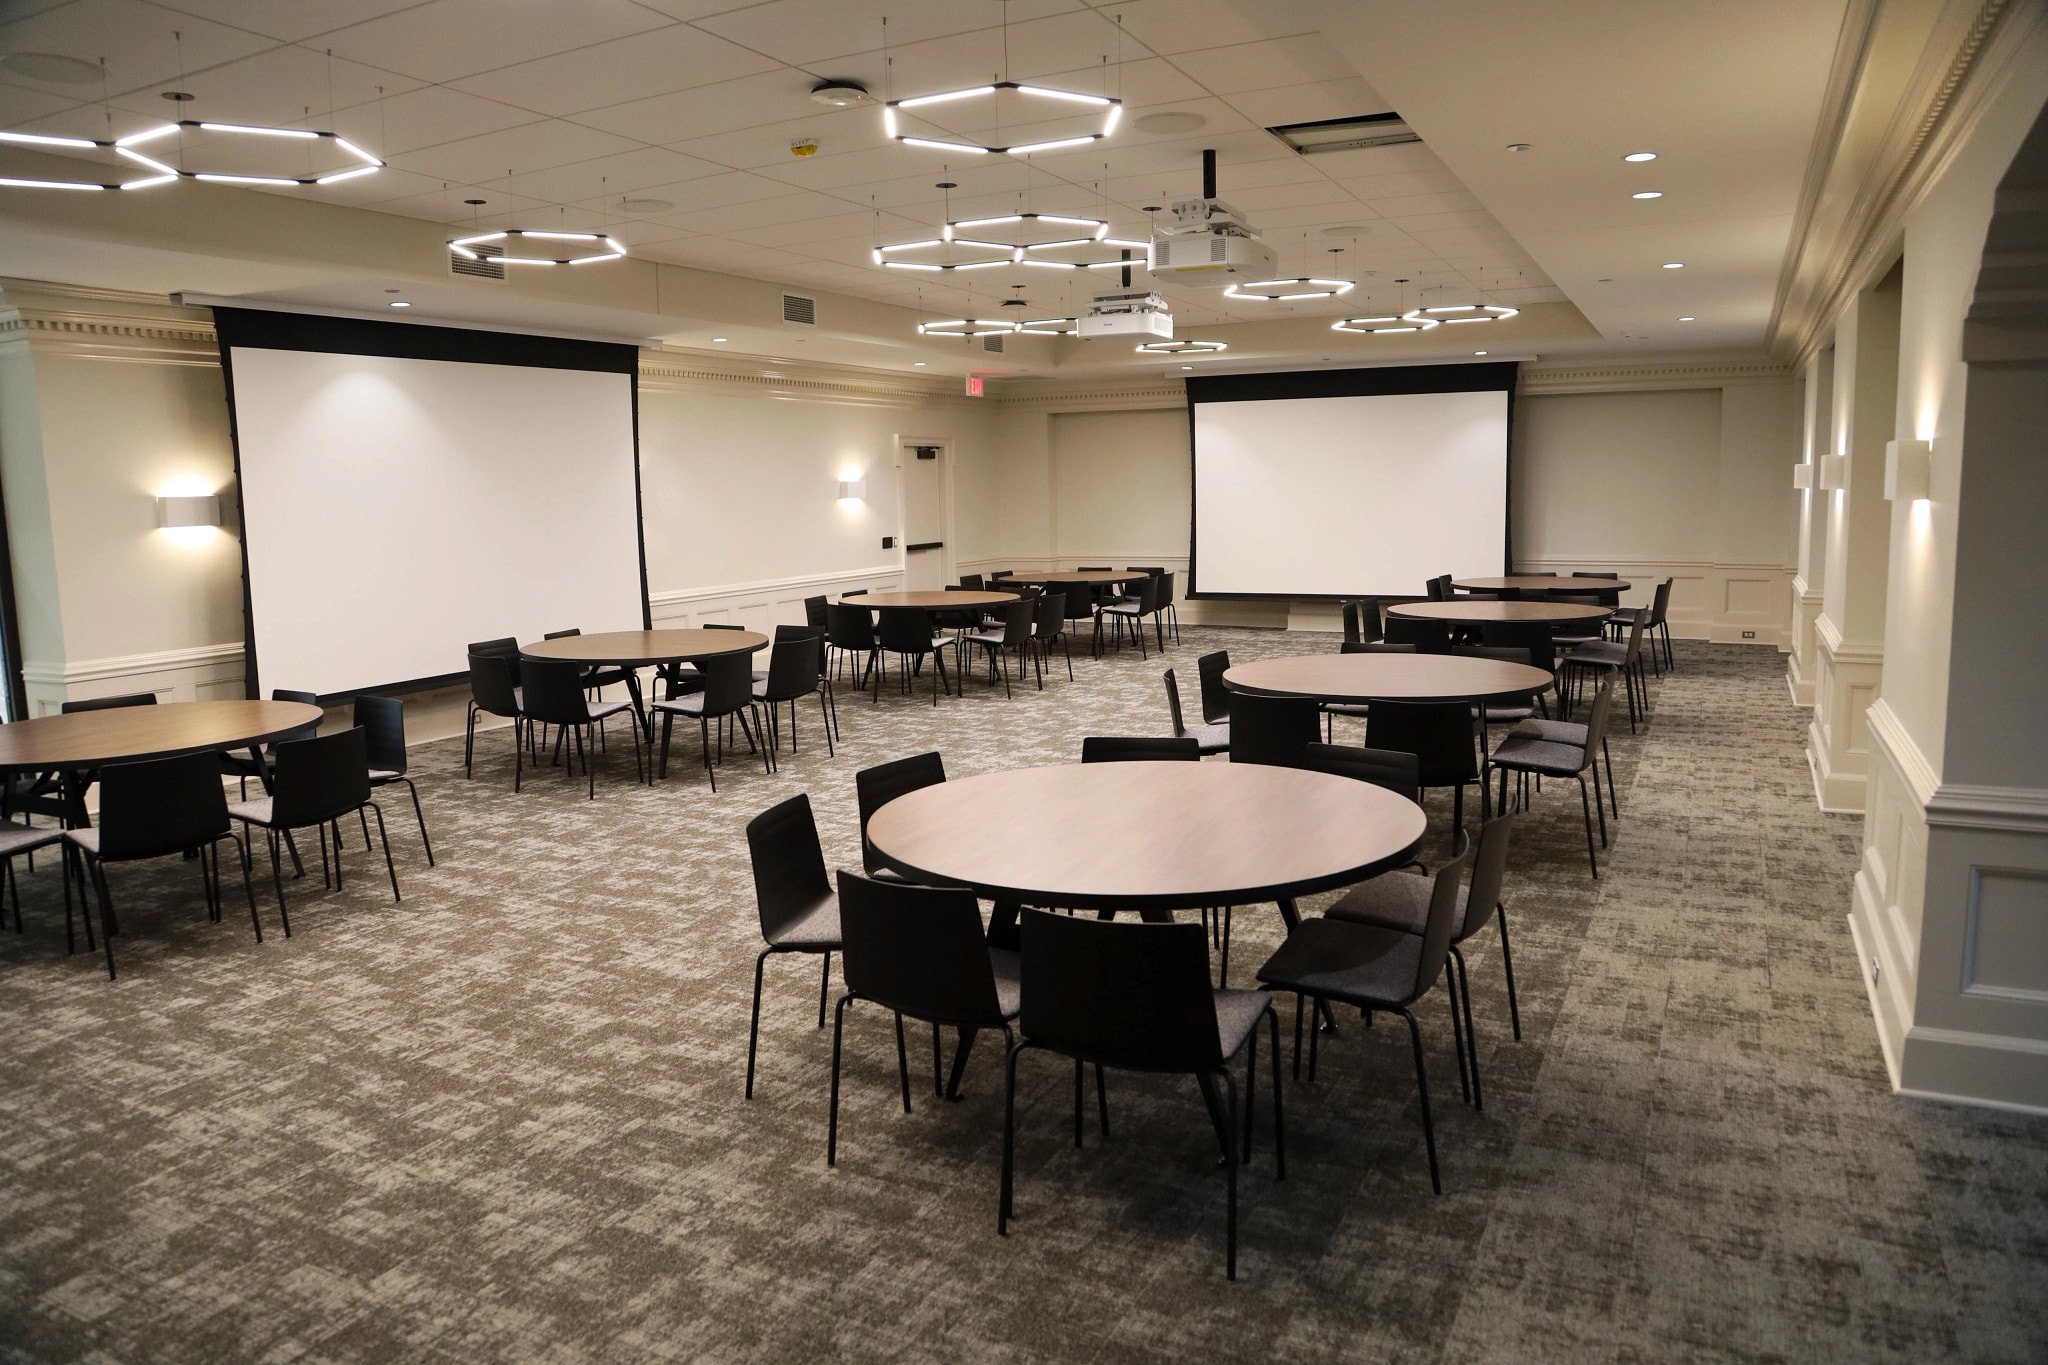 Round tables lined in rows in the Summerfield Room at Jayhawk Welcome Center.